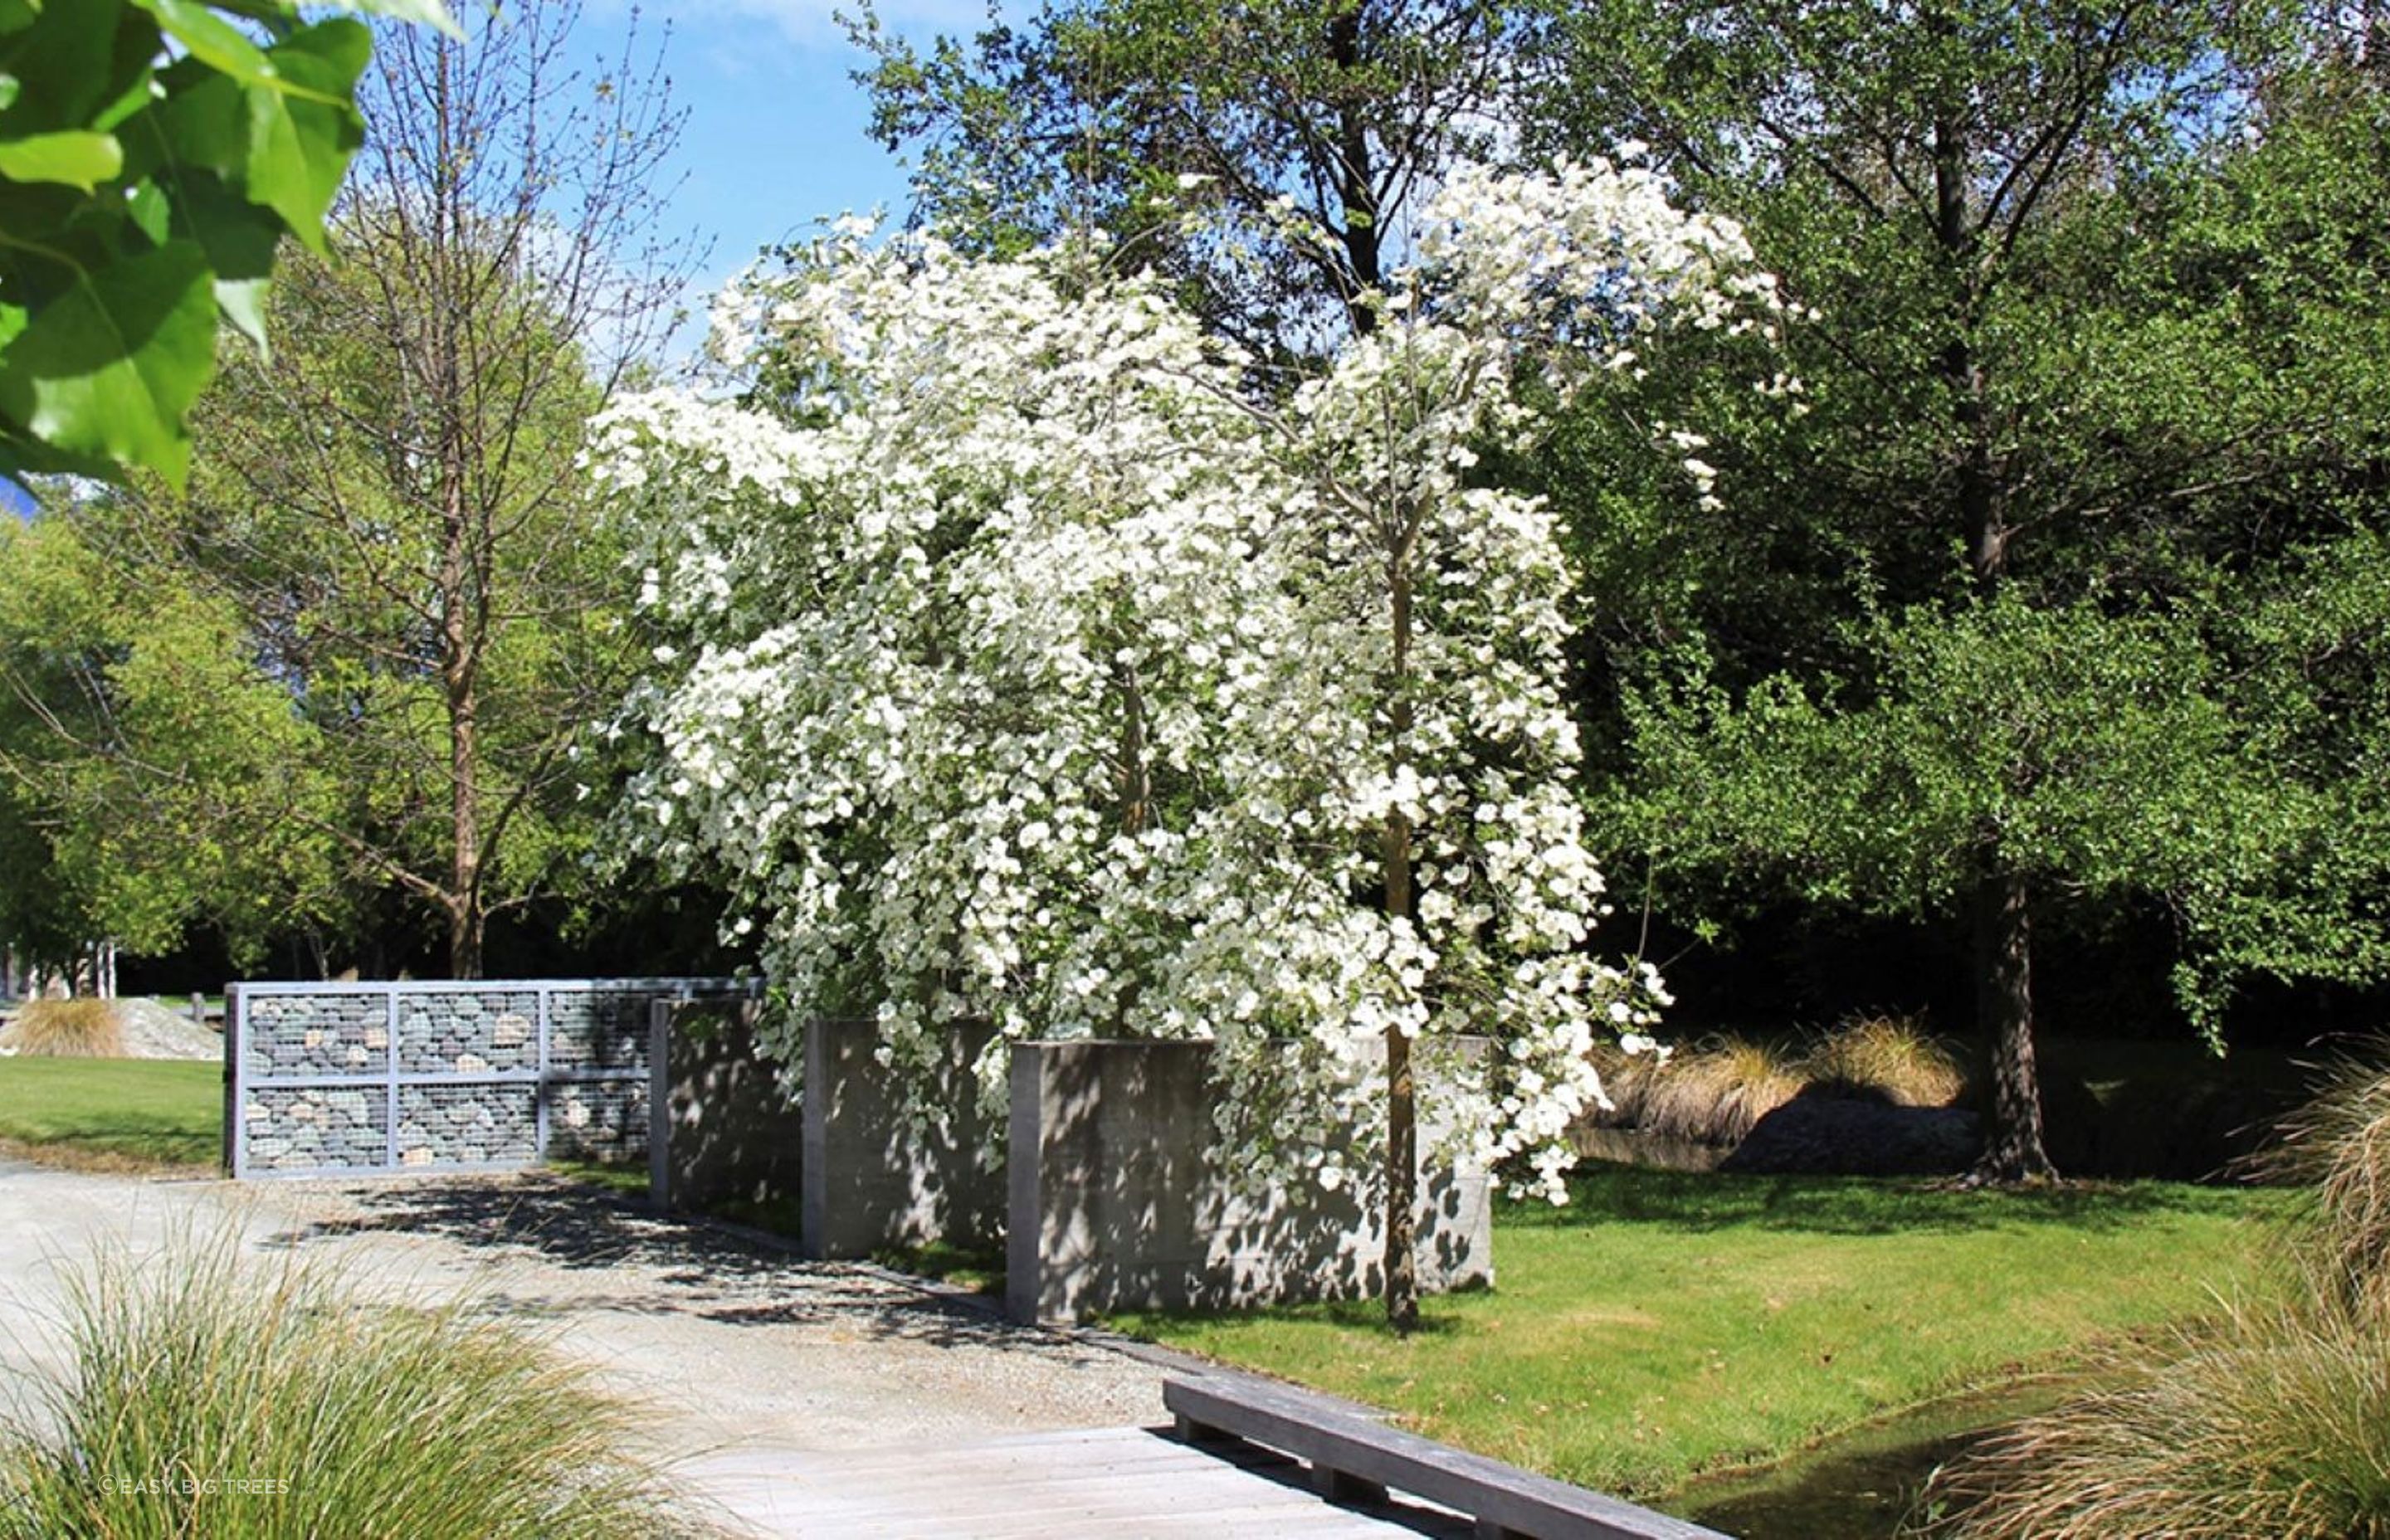 The wonderful white flowers of the Cornus Eddies 'White Wonder' make it a showy inclusion to seriously consider.